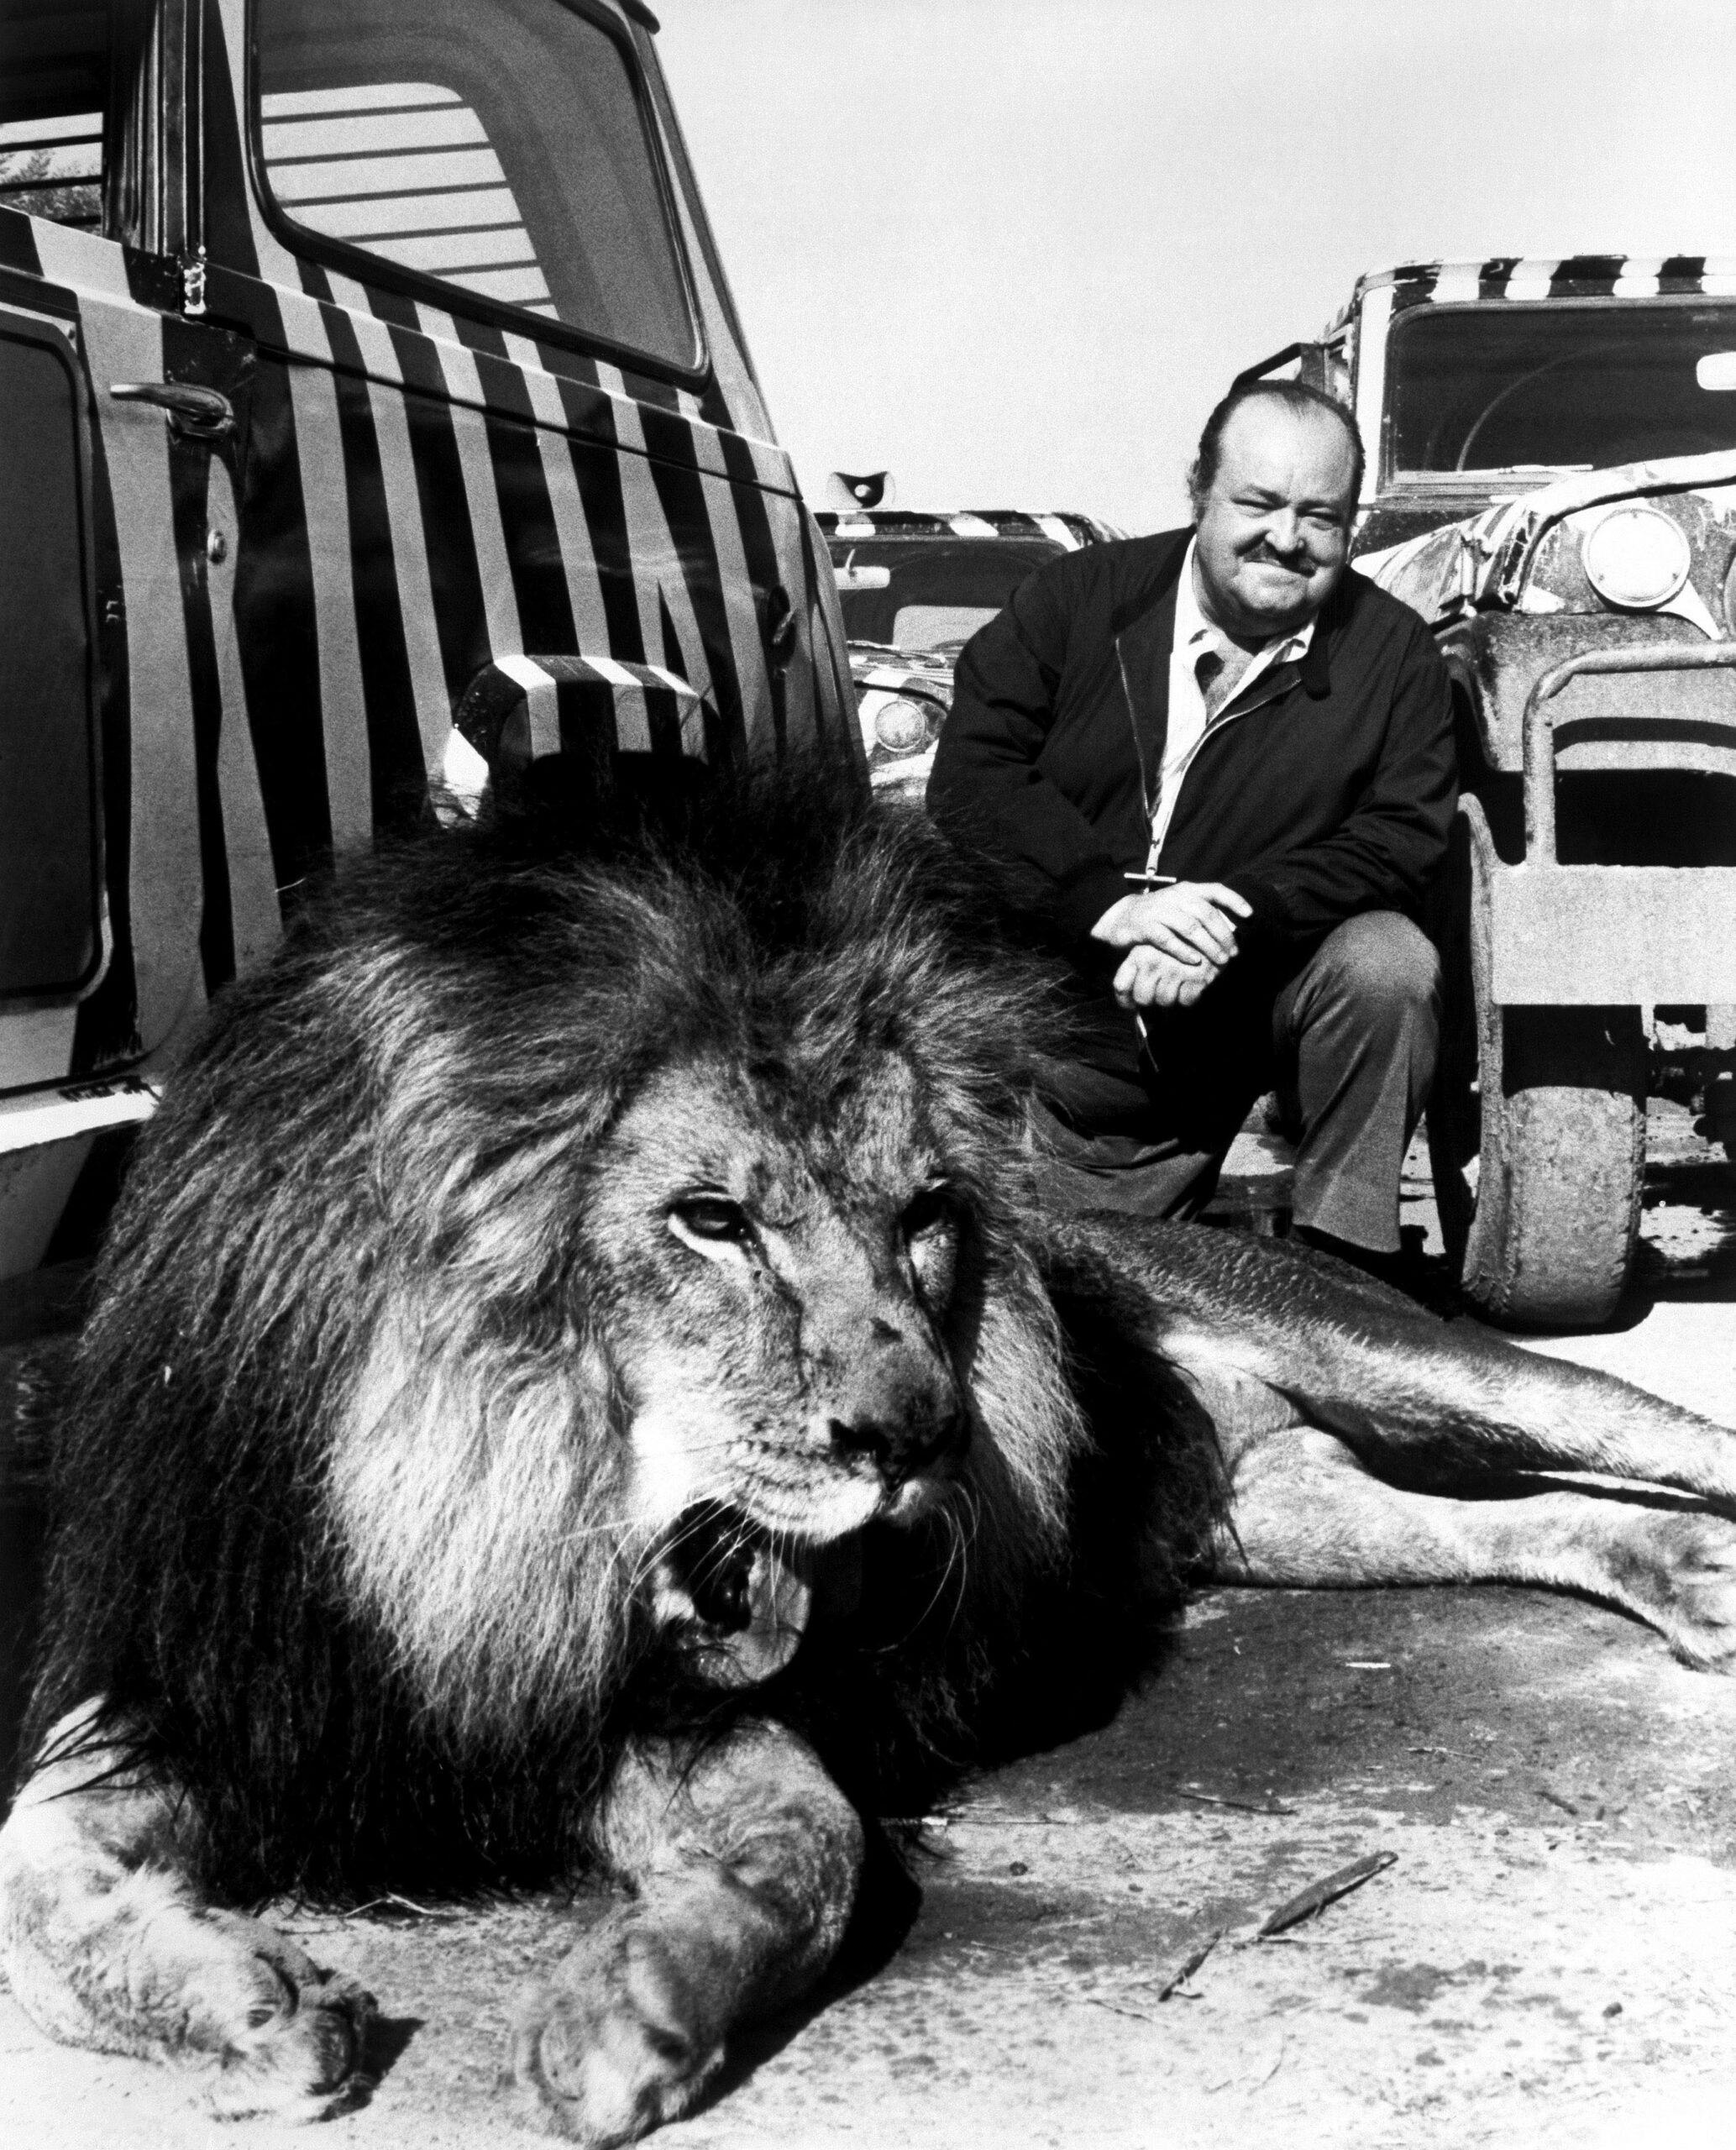 black and white promo shot for the 1973-78 natural history docuseries "Wild, Wild World of Animals." Series host William Conrad is slightly in the background, down on his right knee with his hands clasped across his right thigh and slightly smiling. He is next to a truck, and also next to the truck, just in front of Conrad, is a male lion that is lying down and in the process of just completing or roar or other noise.